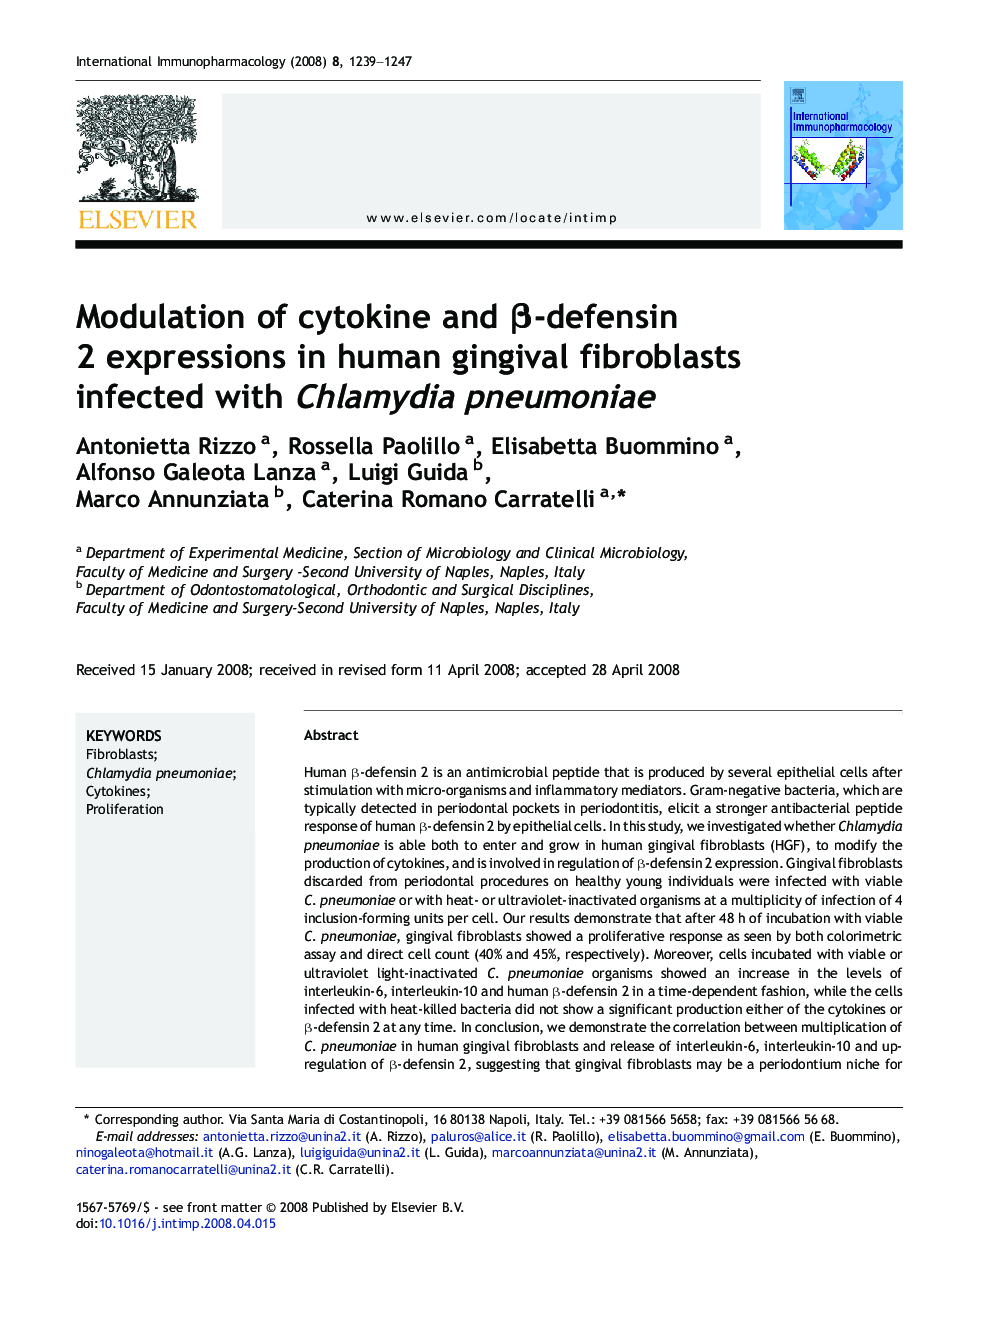 Modulation of cytokine and β-defensin 2 expressions in human gingival fibroblasts infected with Chlamydia pneumoniae